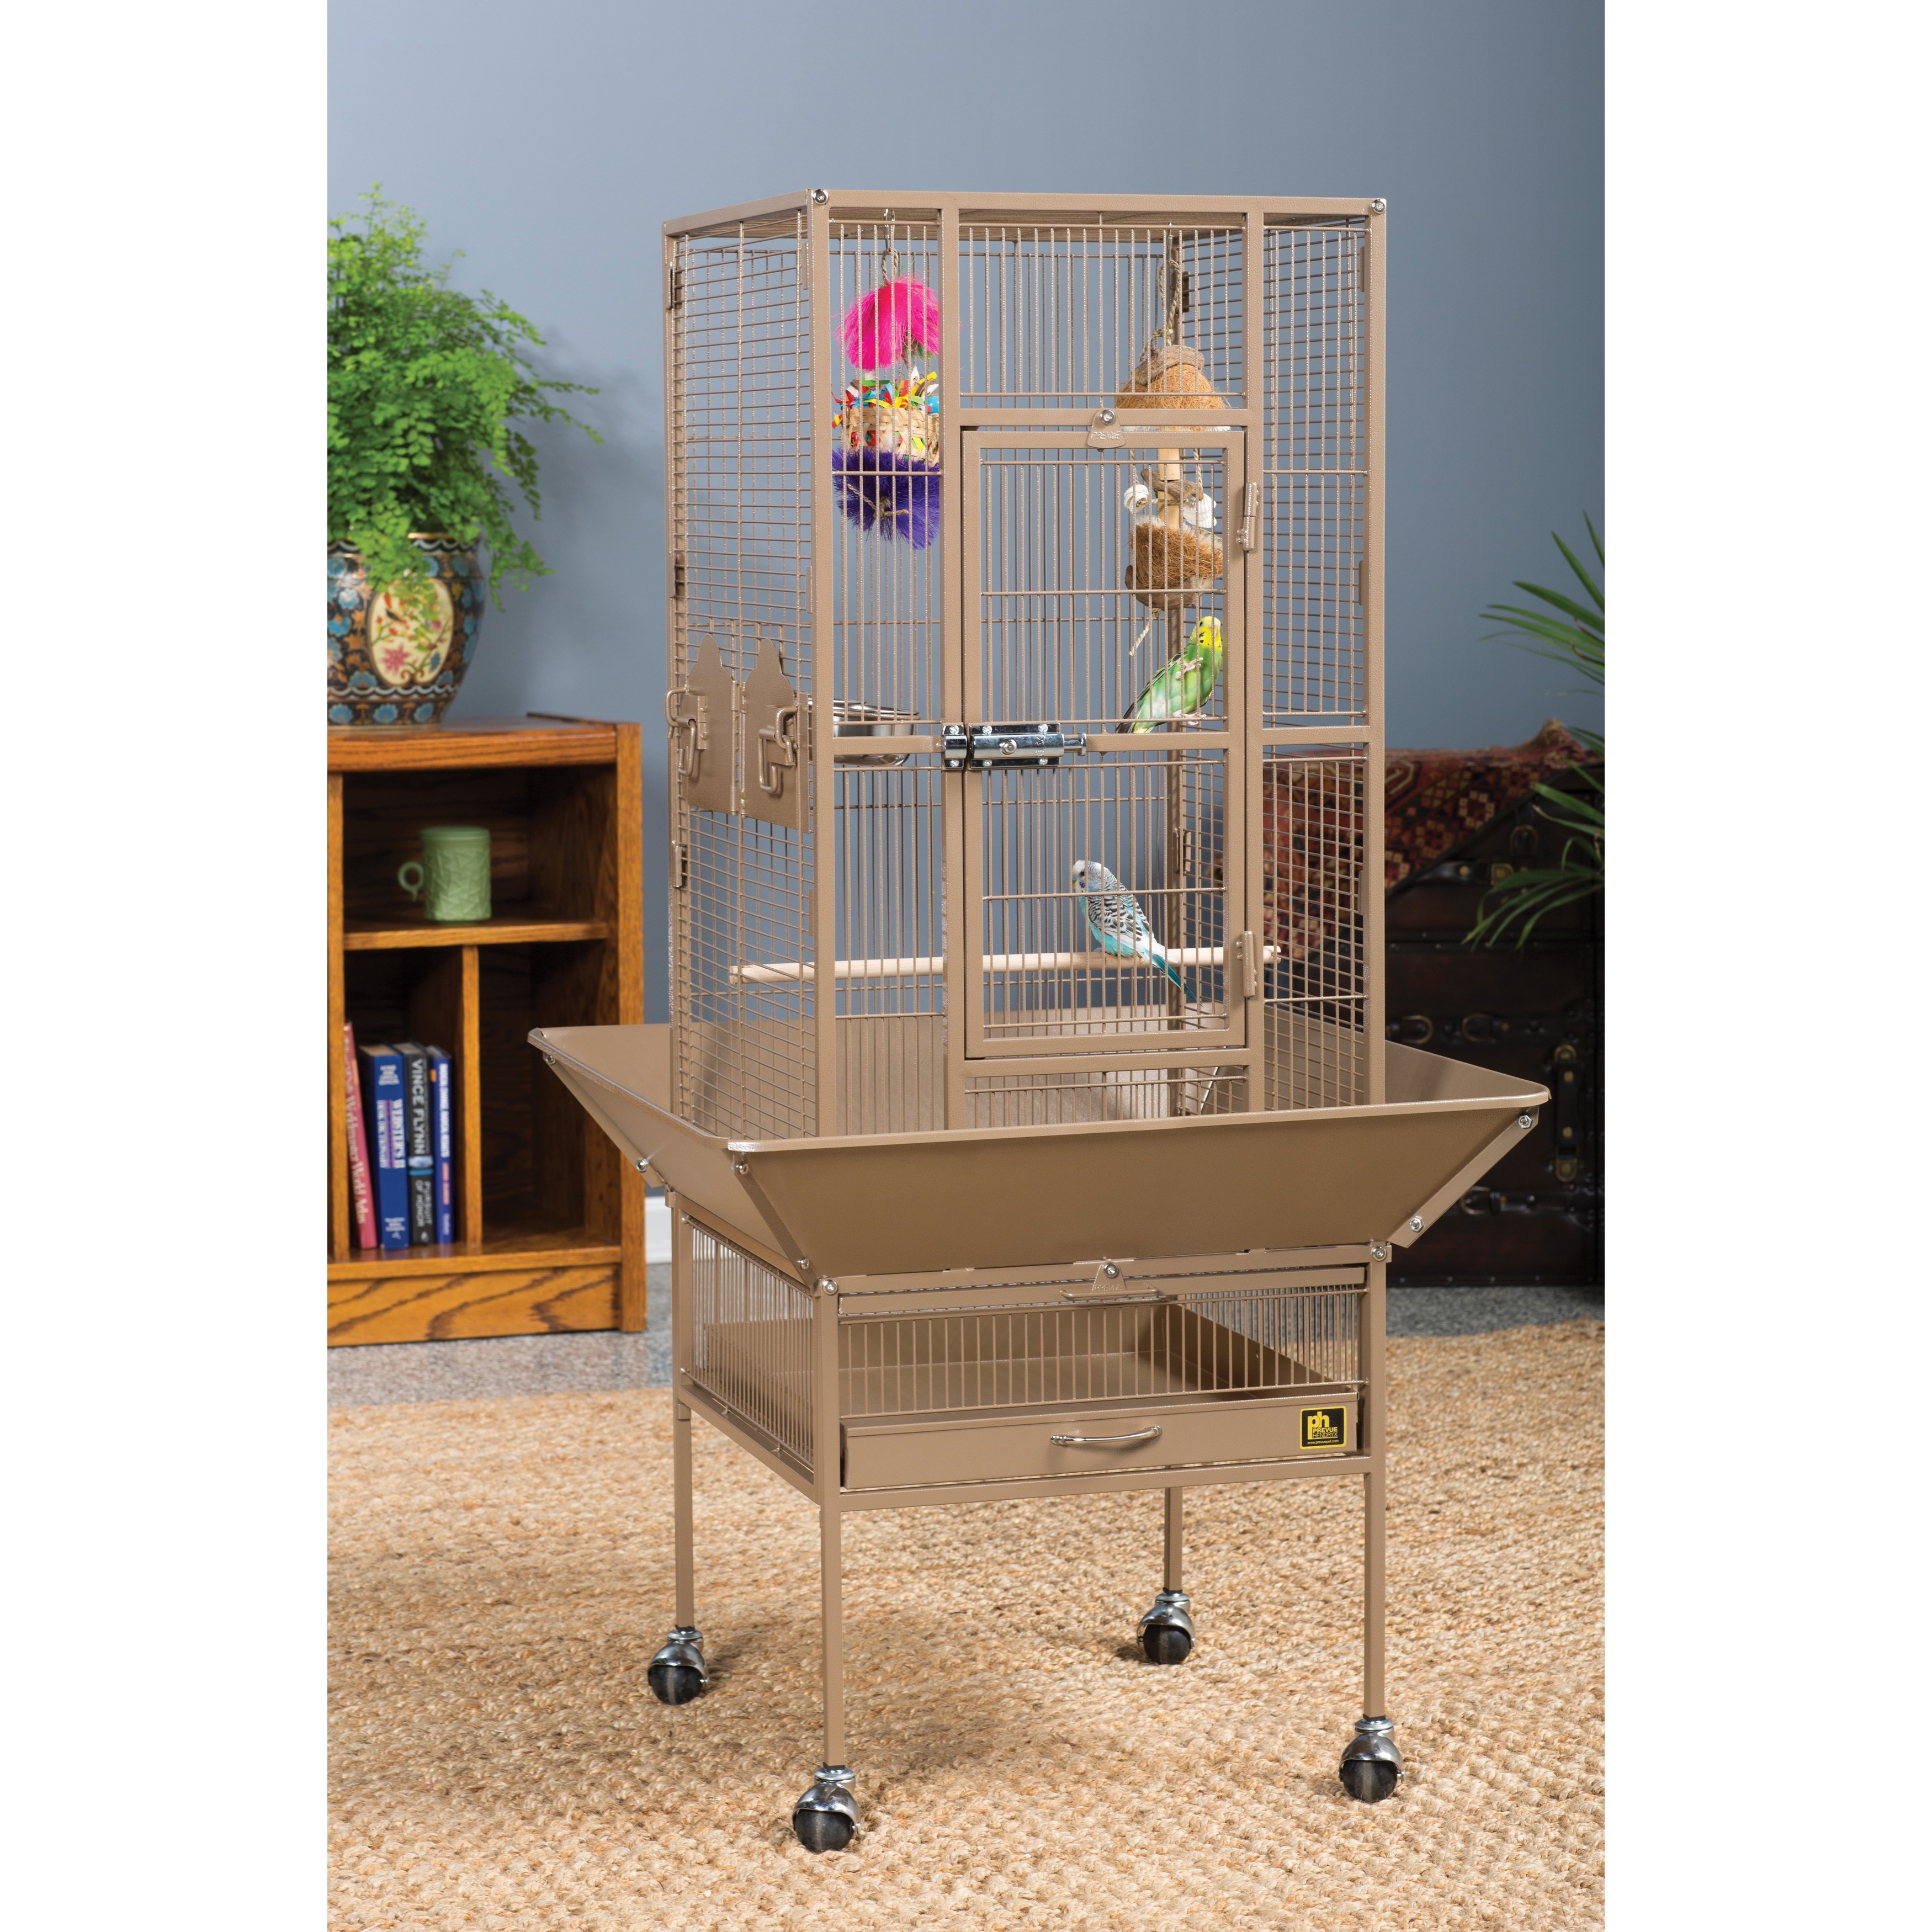 Prevue Pet Products Park Plaza Bird Cage Overstock